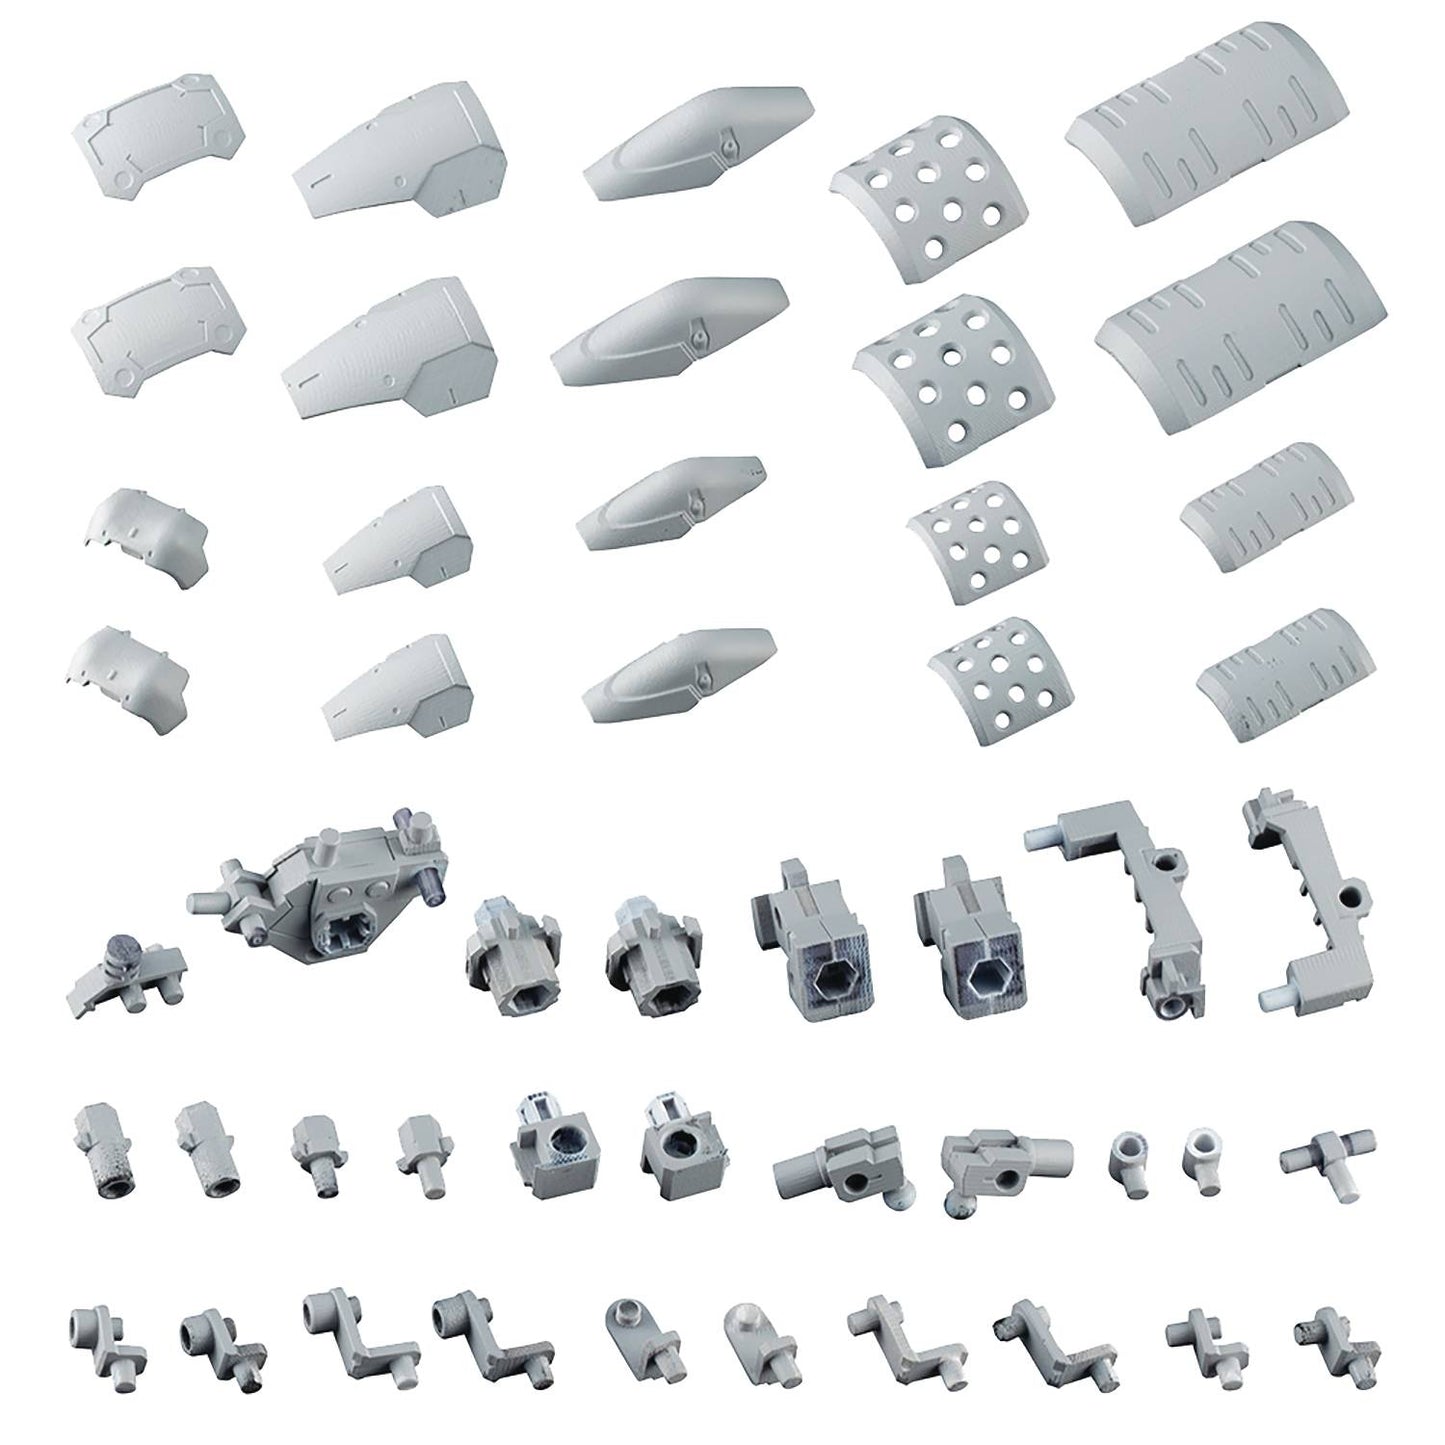 MDL SUPPORT GOODS MECHA SUPPLY07 EXPAN ARMOR TYPE A MDL KIT